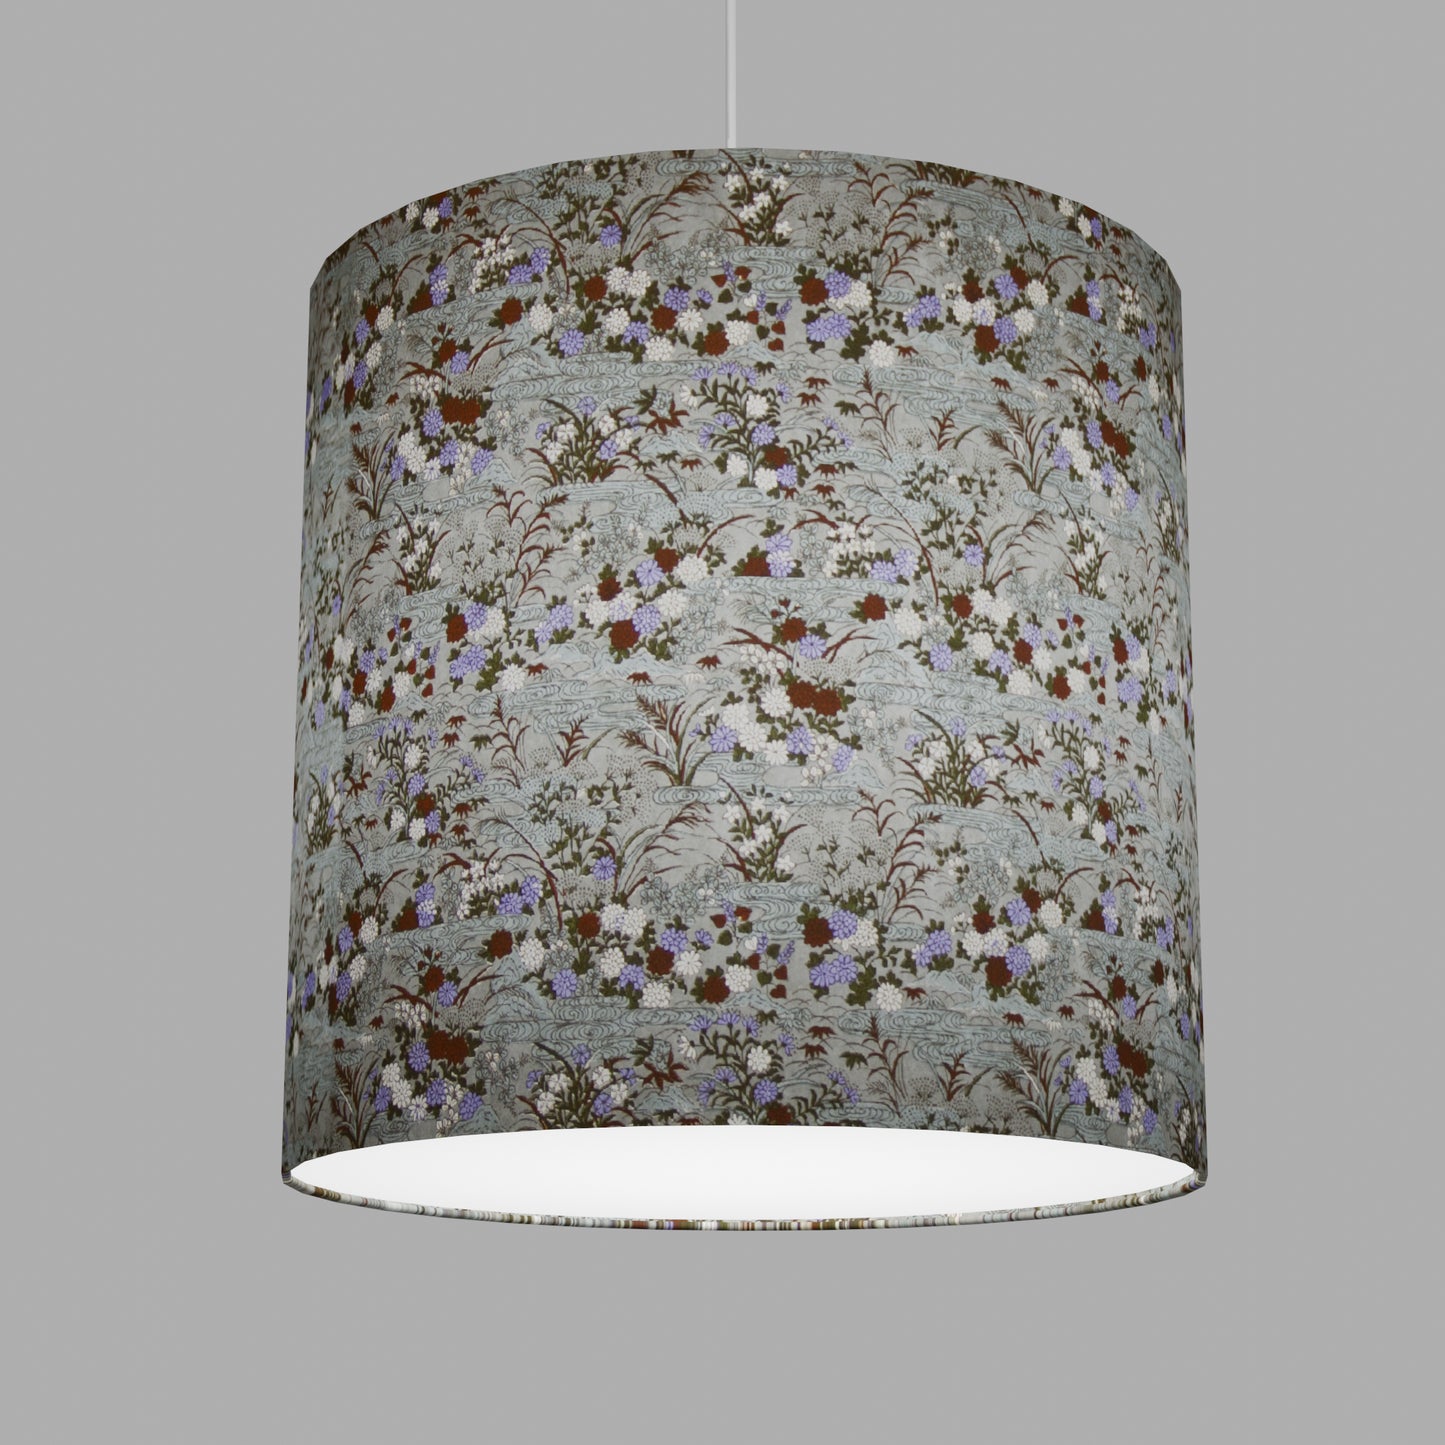 Drum Lamp Shade - W08 ~ Lily Pond, 40cm(d) x 40cm(h)